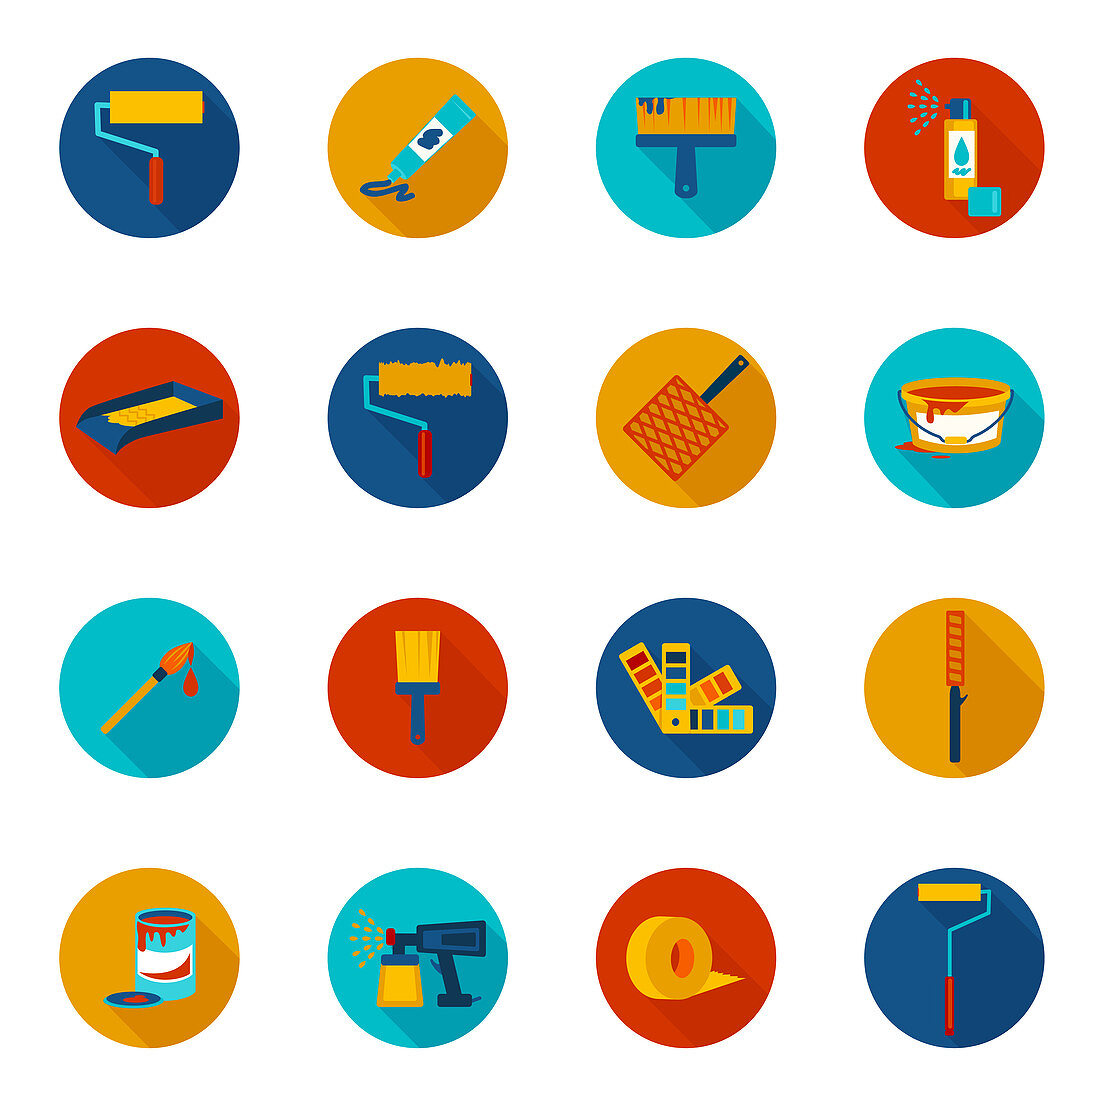 Painting and decorating icons, illustration